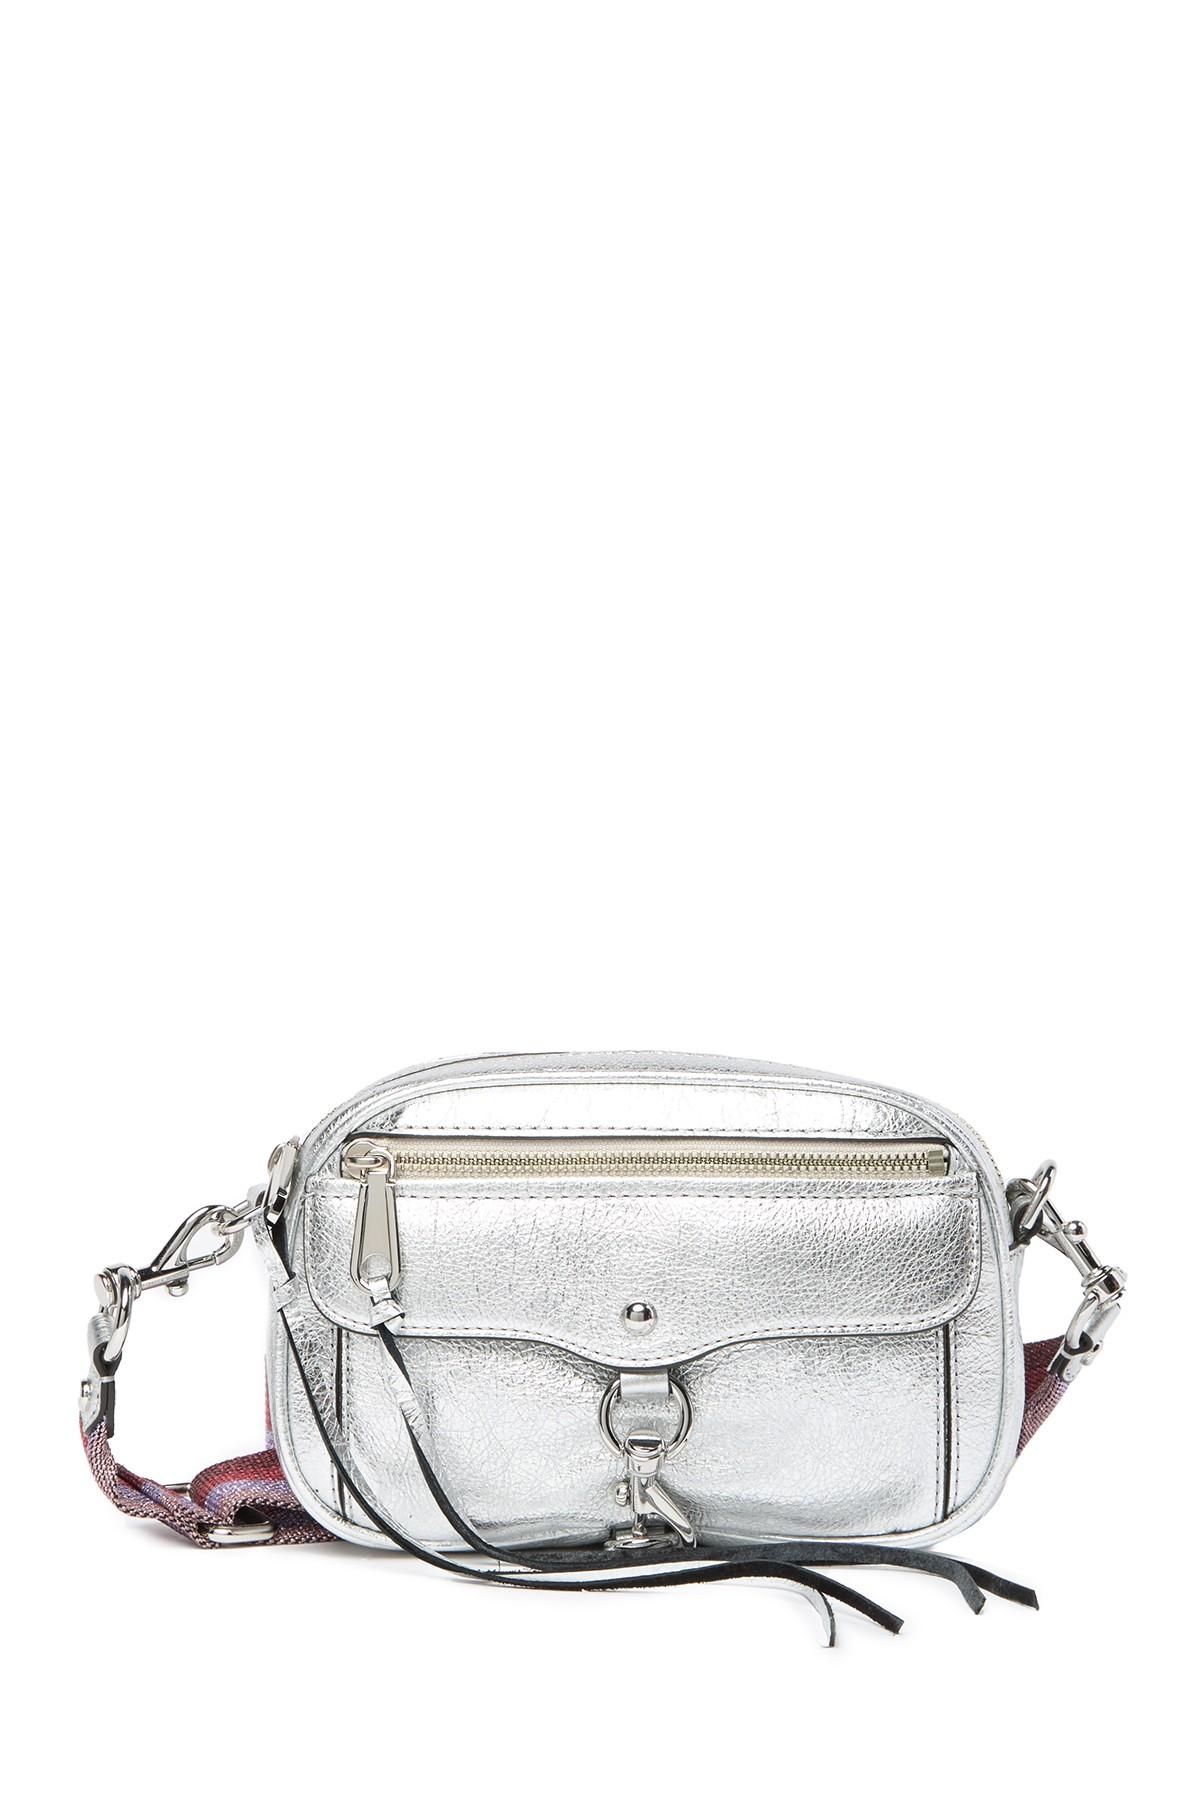 Rebecca Minkoff Blythe Leather Crossbody Bag With Guitar Strap in Metallic - Lyst